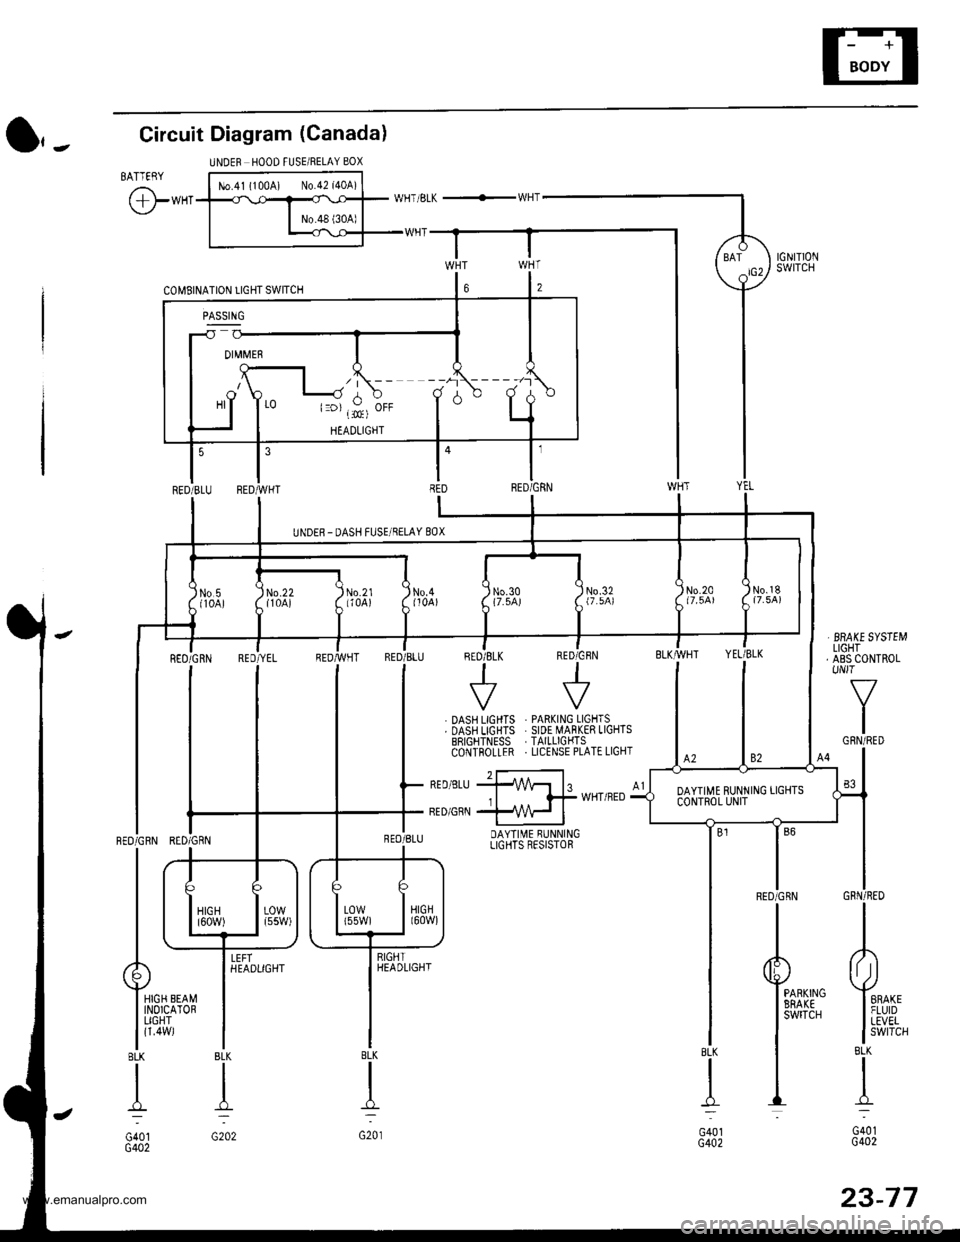 HONDA CR-V 1999 RD1-RD3 / 1.G Workshop Manual 
UNDER HOOD FUSEiRELAY 80X
WHT/BLK +WHT
c0t\48rNATroN UGHT SWITCH
4
RED
HIGH BEAMINOICATORLIGHT
l=o) , :., oFF
O,-Circuit Diagram (Canada)
BATTEBY
@*"
UNDER- DASH FUSE/RELAY 8OX
BBAXE SYSTEMLIGHTABS C